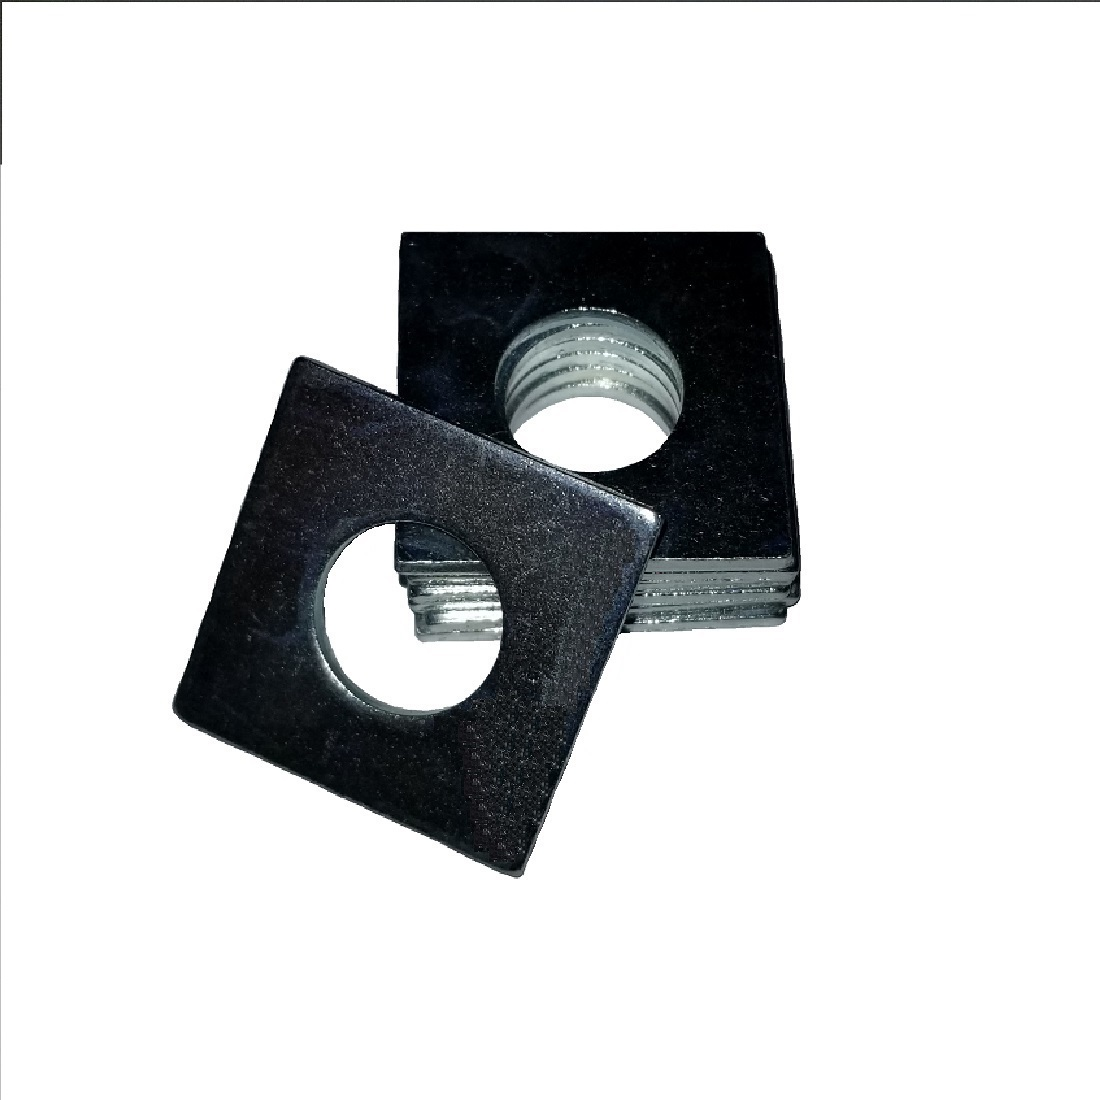 Square OD Washer - 0.437 ID, 2.000 OD, 0.250 Thick, Stainless - 300 Series